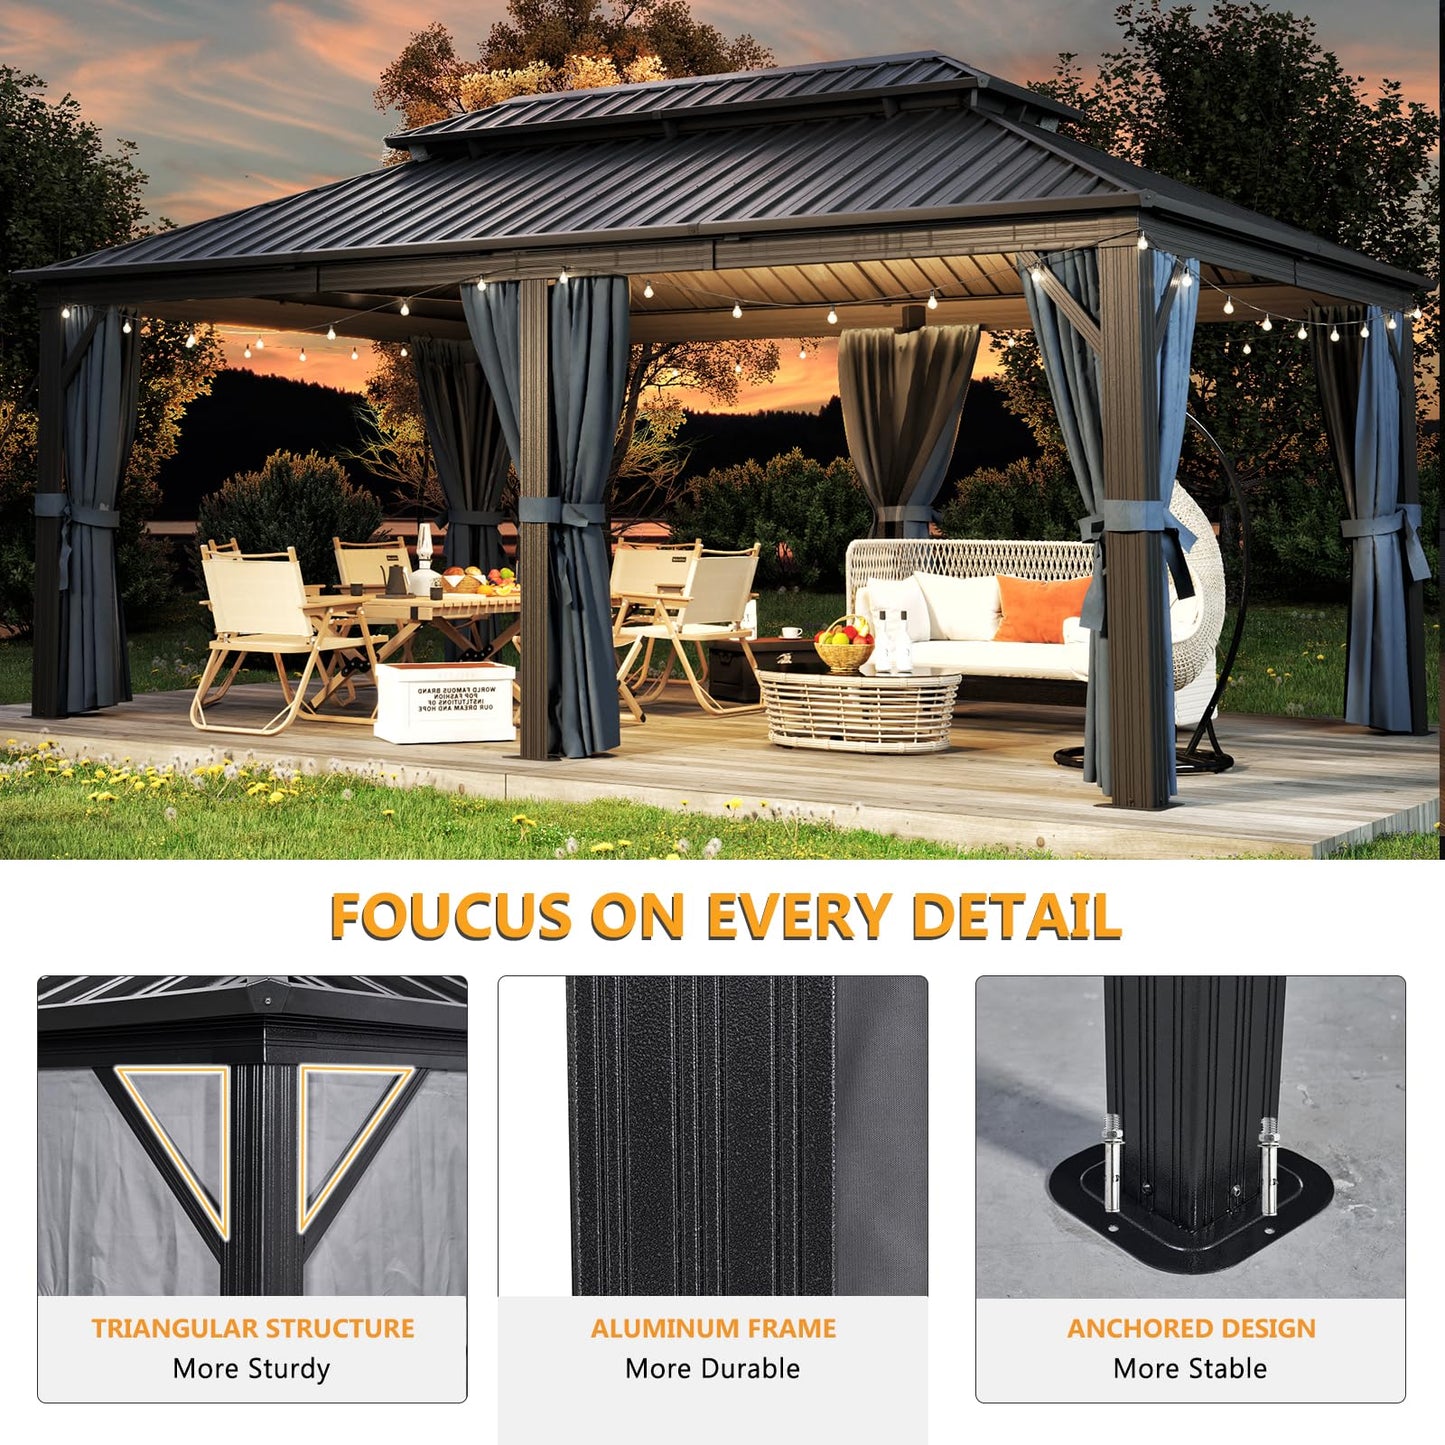 Jolydale 12FT X 20FT Hardtop Gazebo, Galvanized Steel Dual-Layer Top, Aluminum Metal Gazebo with Netting and Curtains, Permanent Gazebo Pavilion for